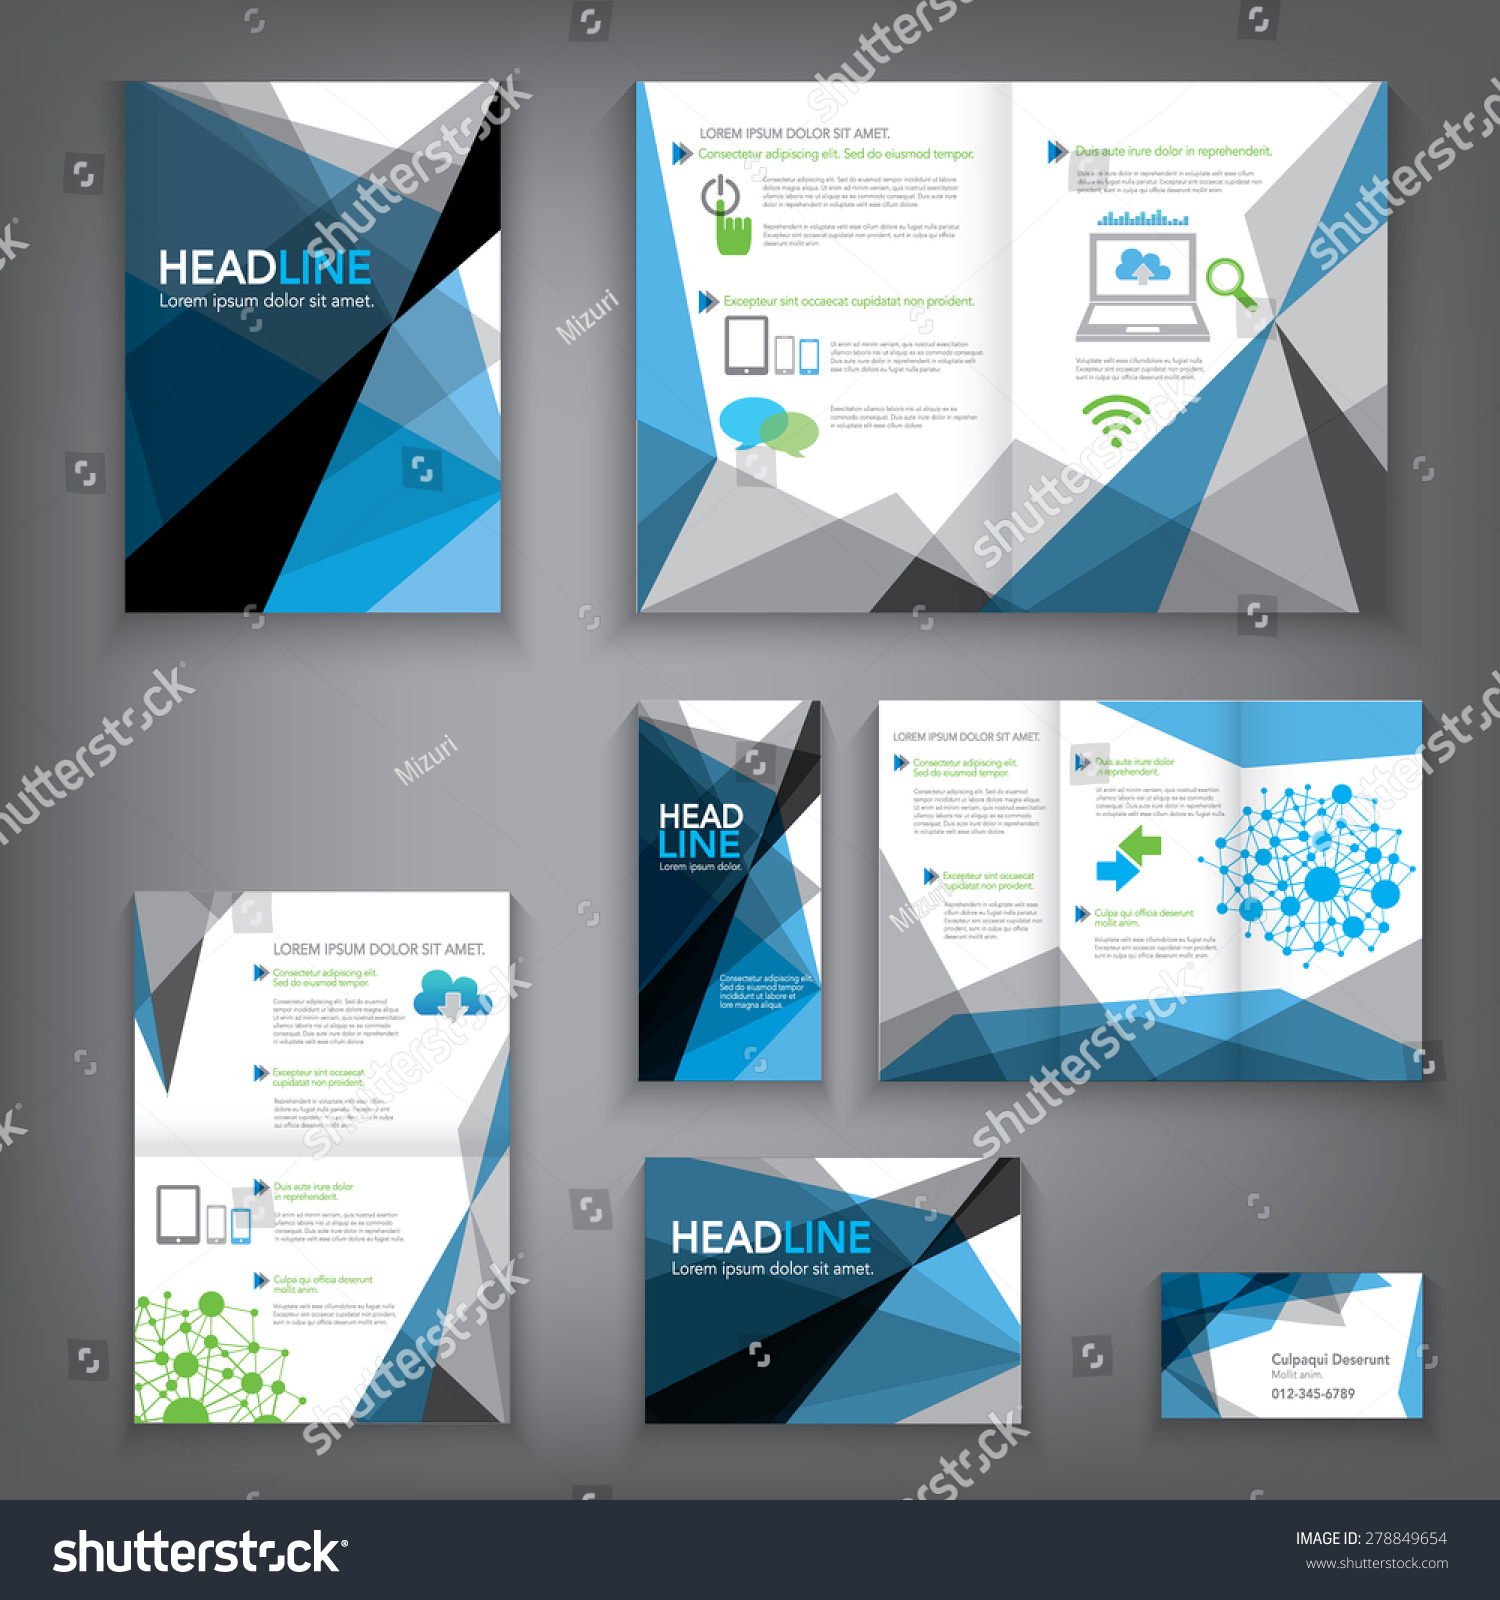 Design Abstract Vector Brochure Template. Flyer Layout, Flat Style, Infographic Elements in A3,A4,A5 size. #278849654